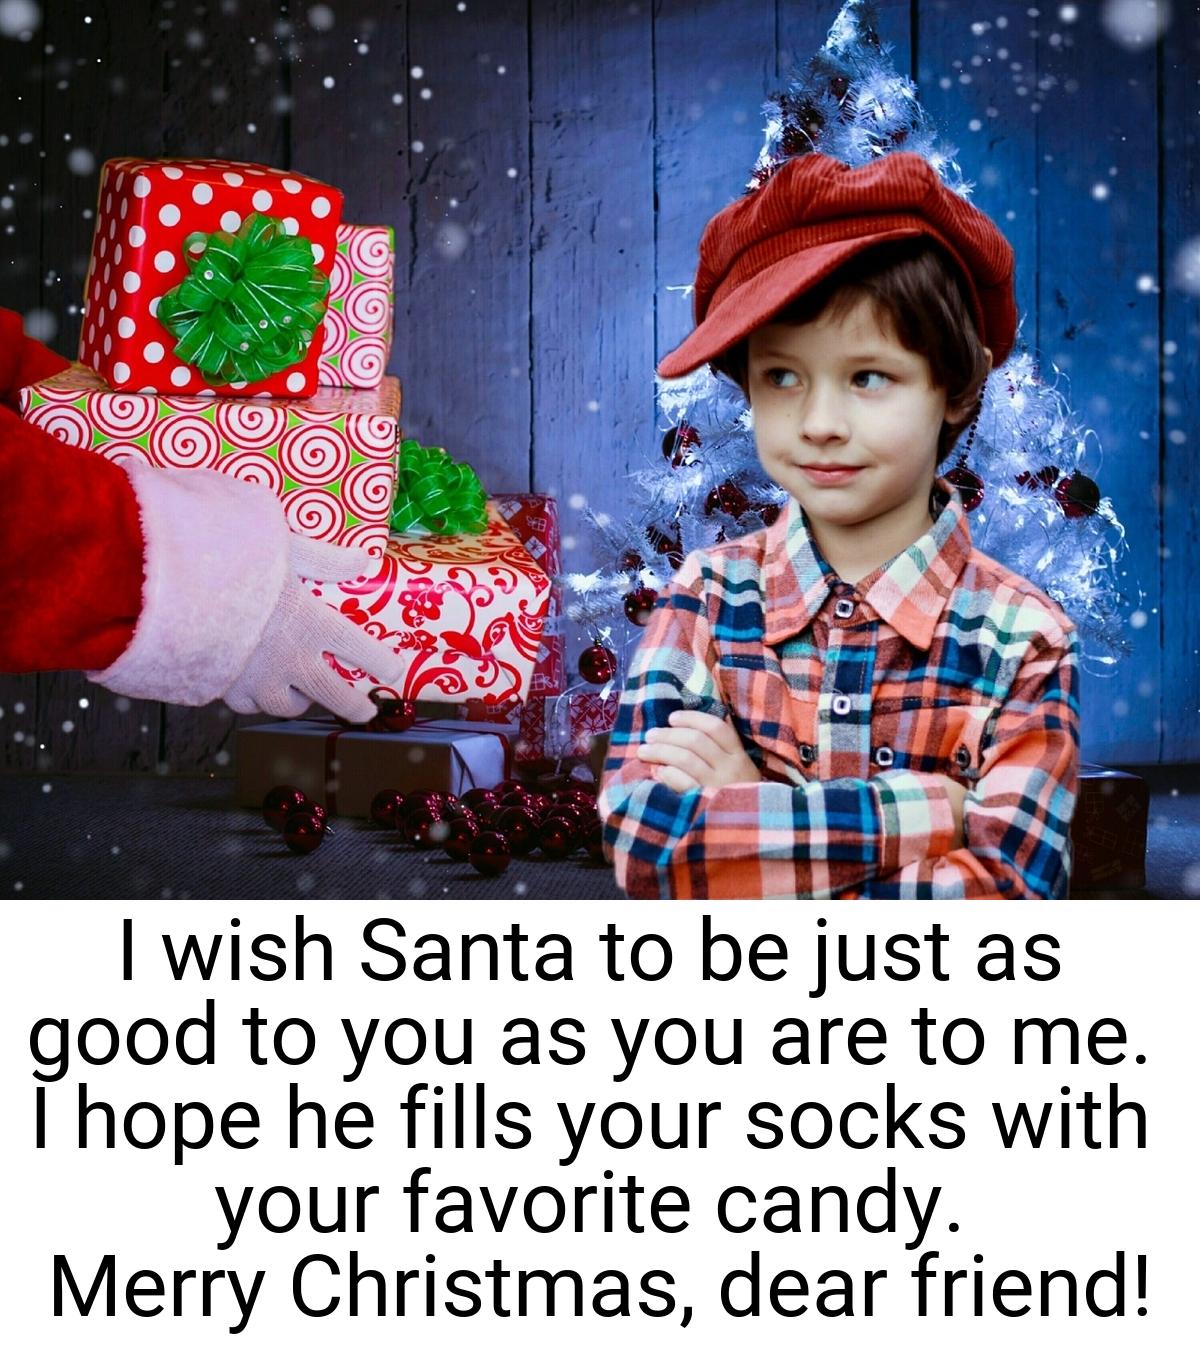 I wish Santa to be just as good to you as you are to me. I